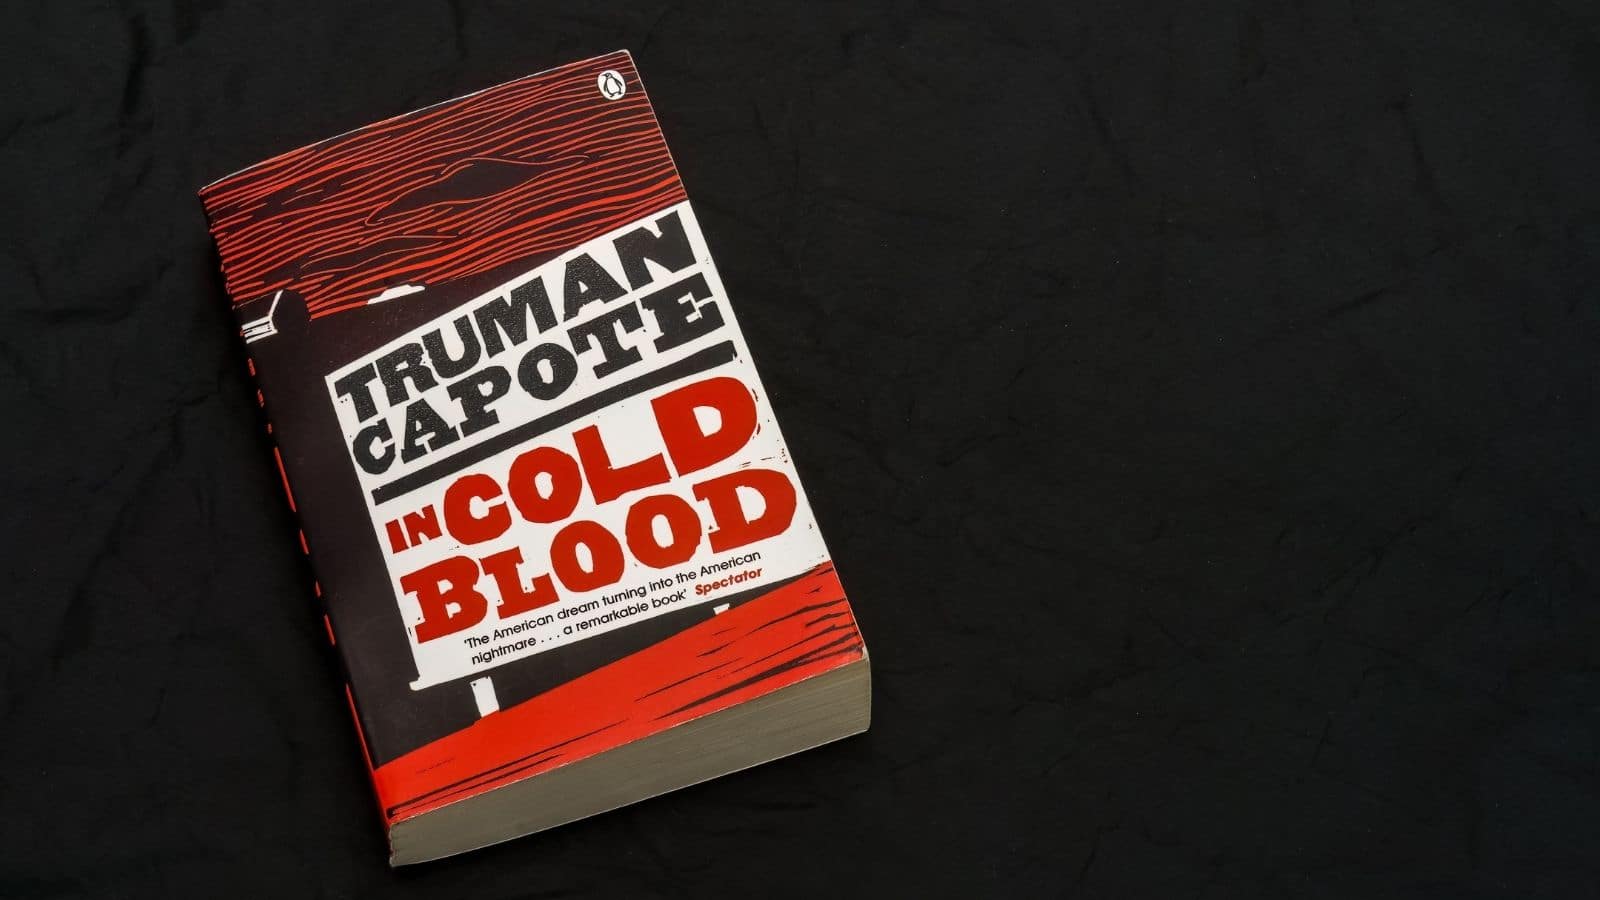 <p>Experience the terrifying real-life story of the Clutter family killings in isolated Kansas, thoughtfully told by Truman Capote. The divide between fiction and non-fiction has been lost in the dreaded tale of “In Cold Blood,” which explores subjects of murder, psychology, and the darkness of American society.</p>